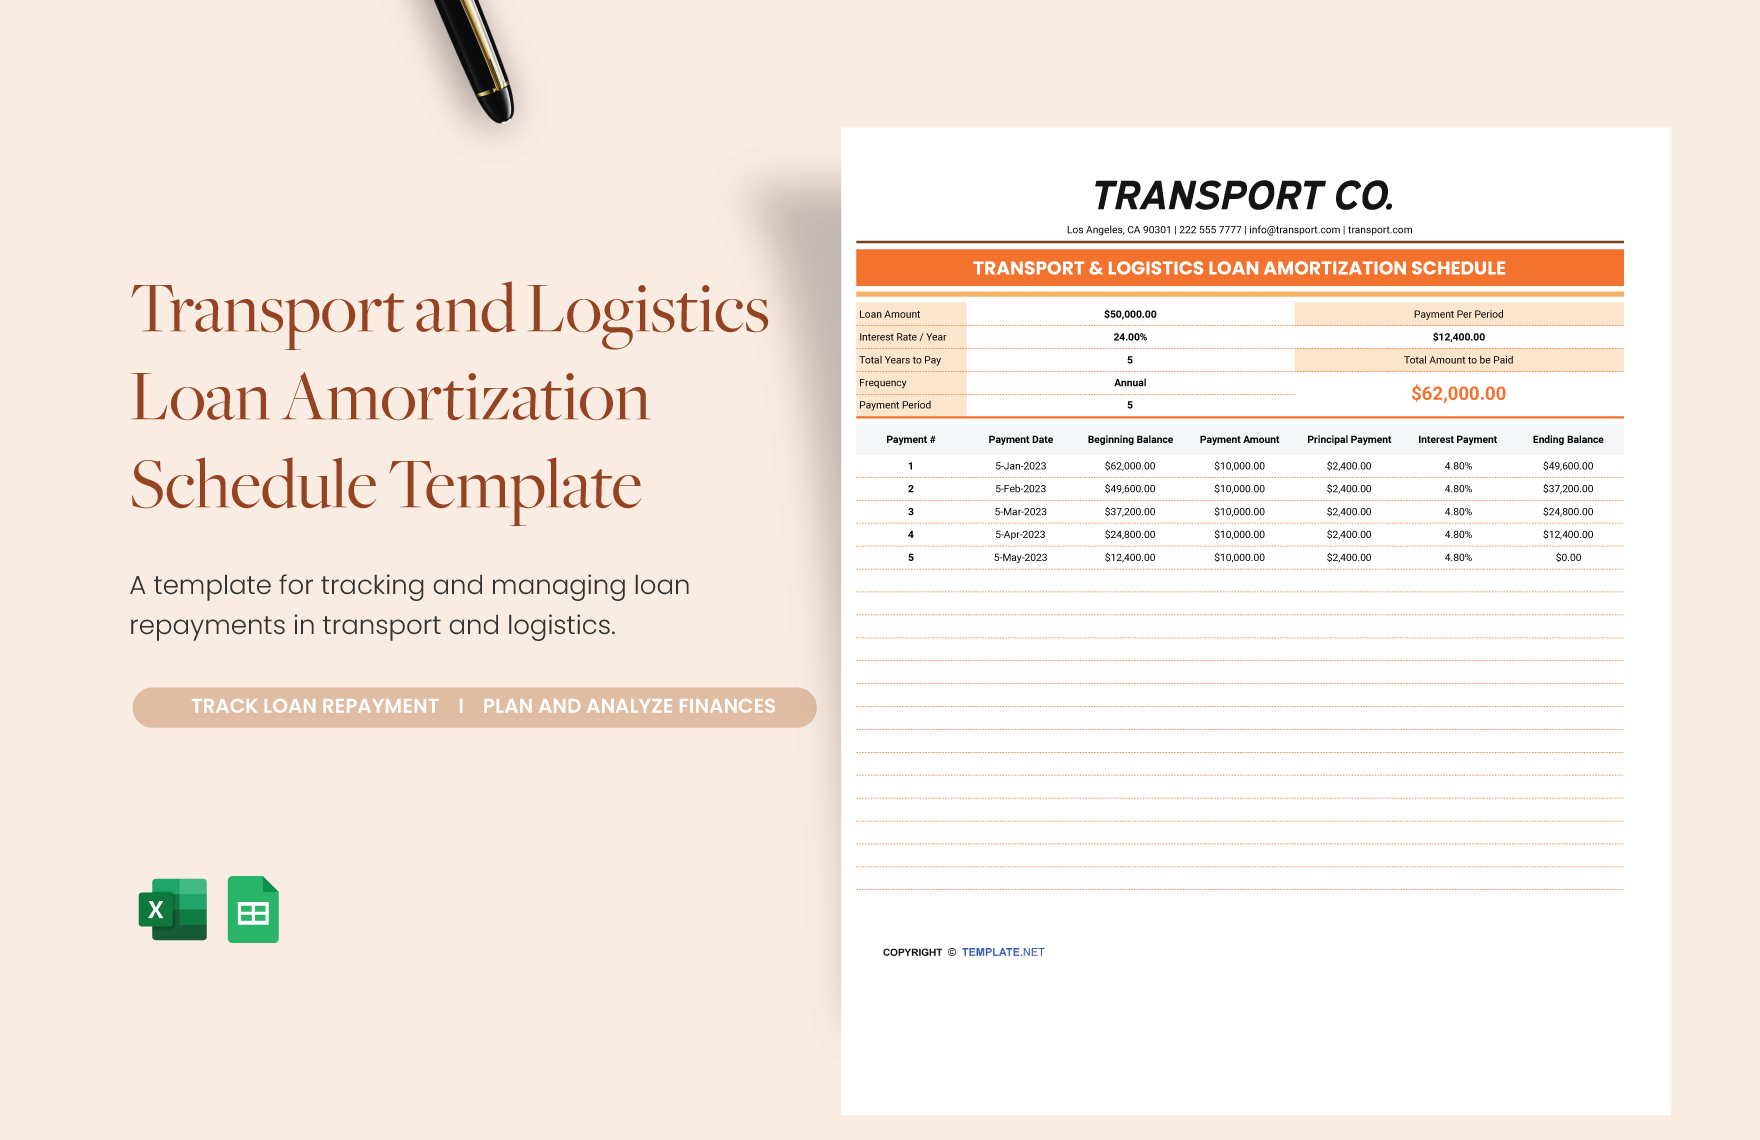 Transport and Logistics Loan Amortization Schedule Template in Excel, Google Sheets